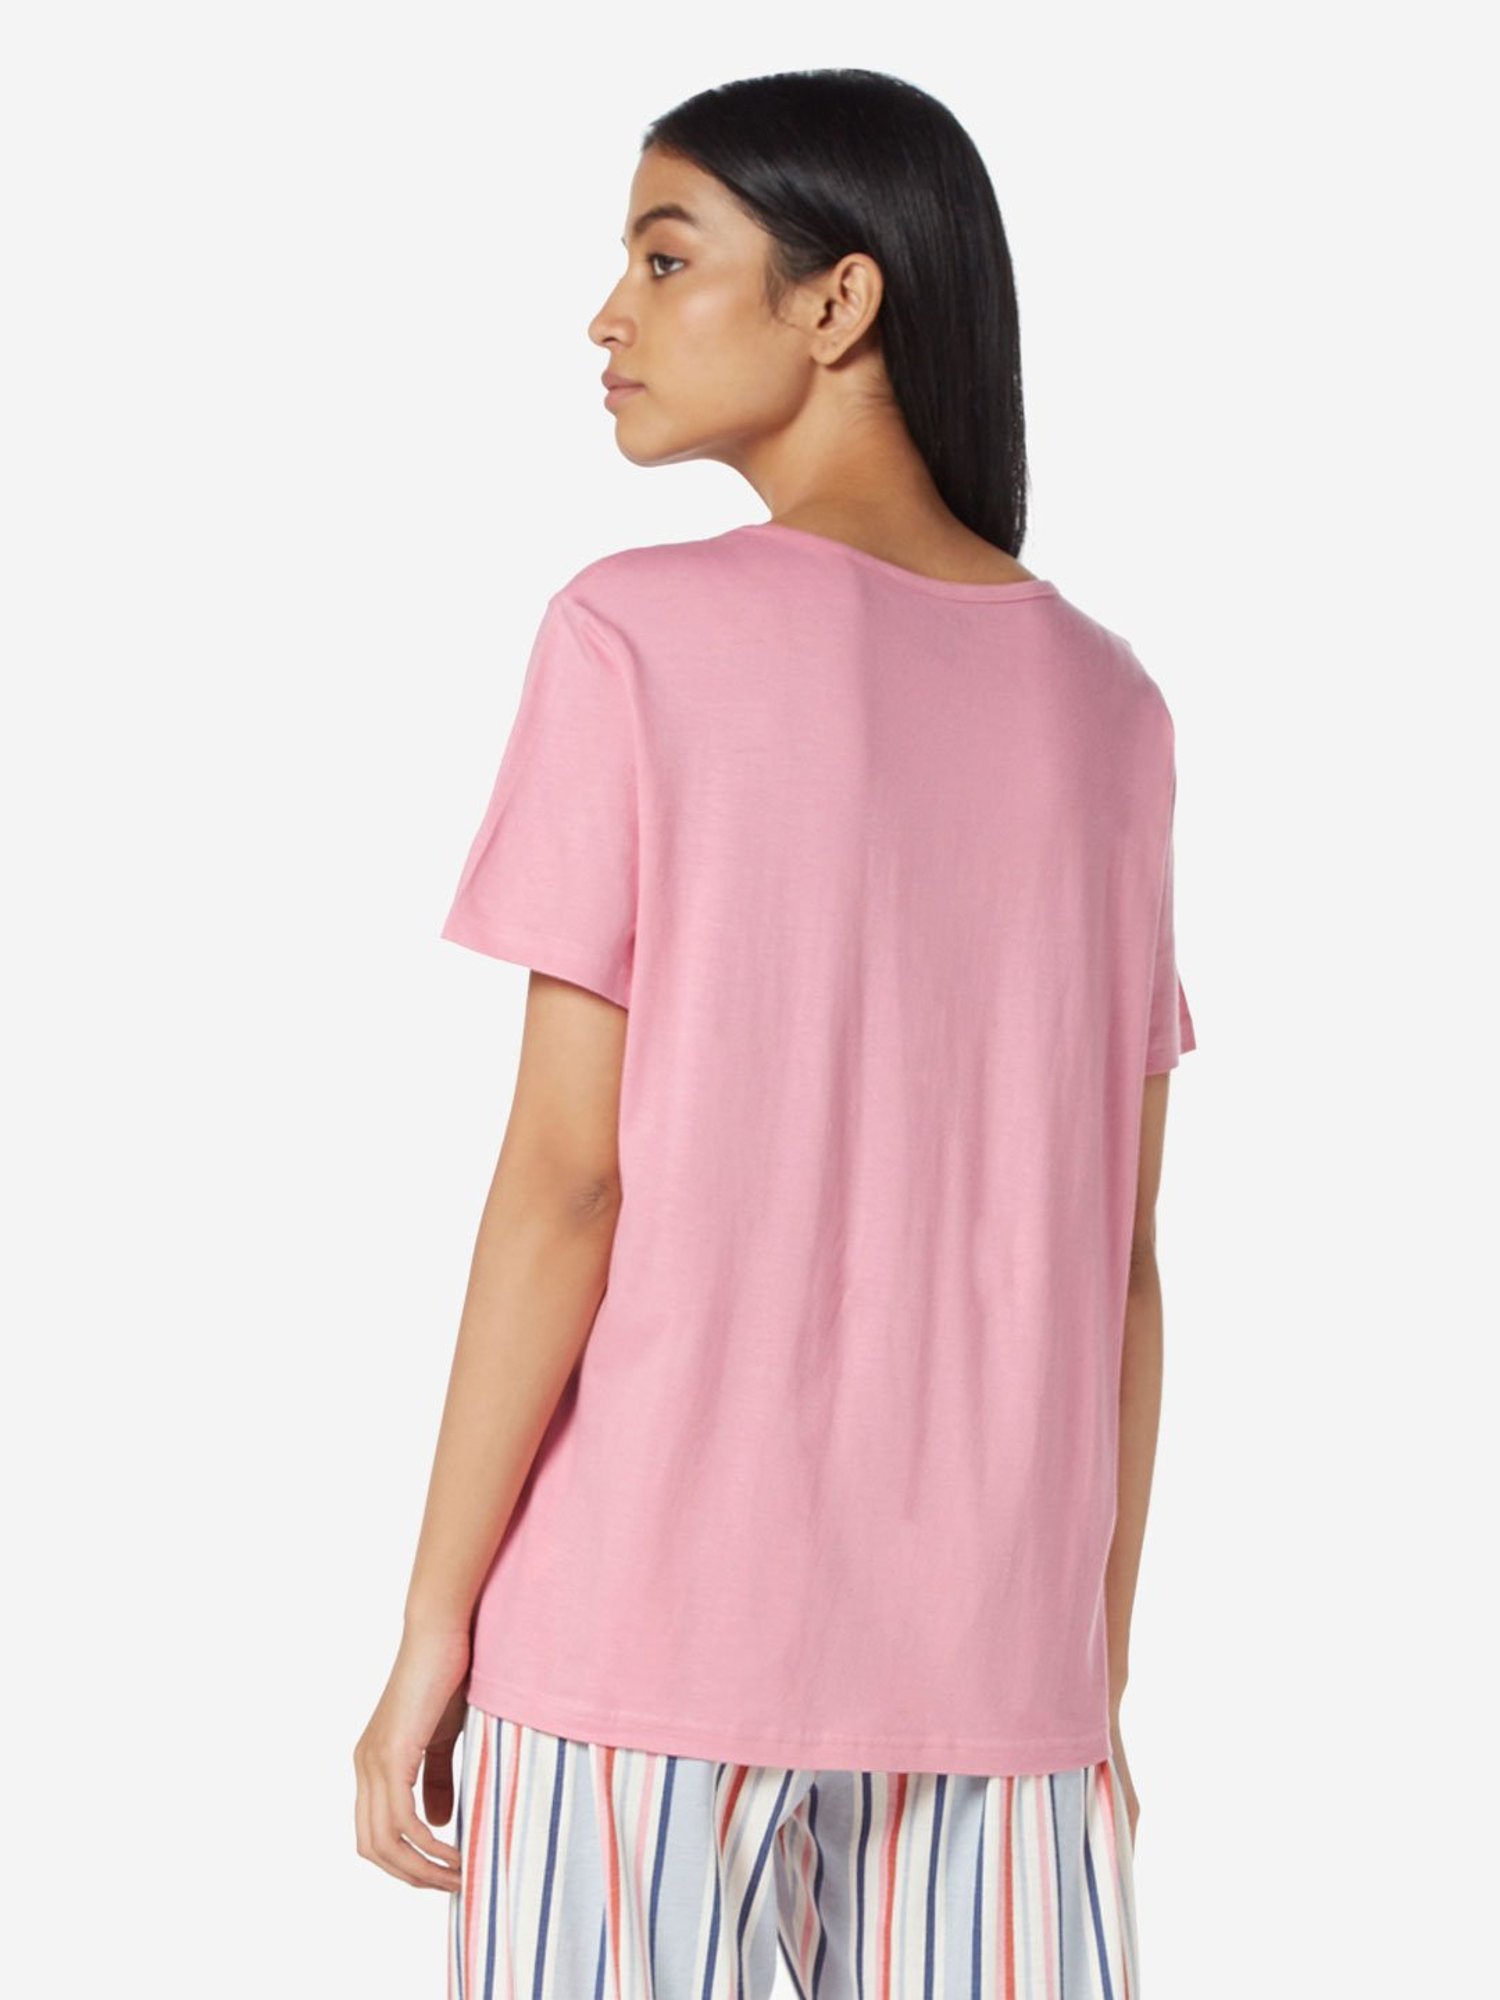 Buy Wunderlove by Westside Pink Contrast Printed T-Shirt for Online @ Tata  CLiQ